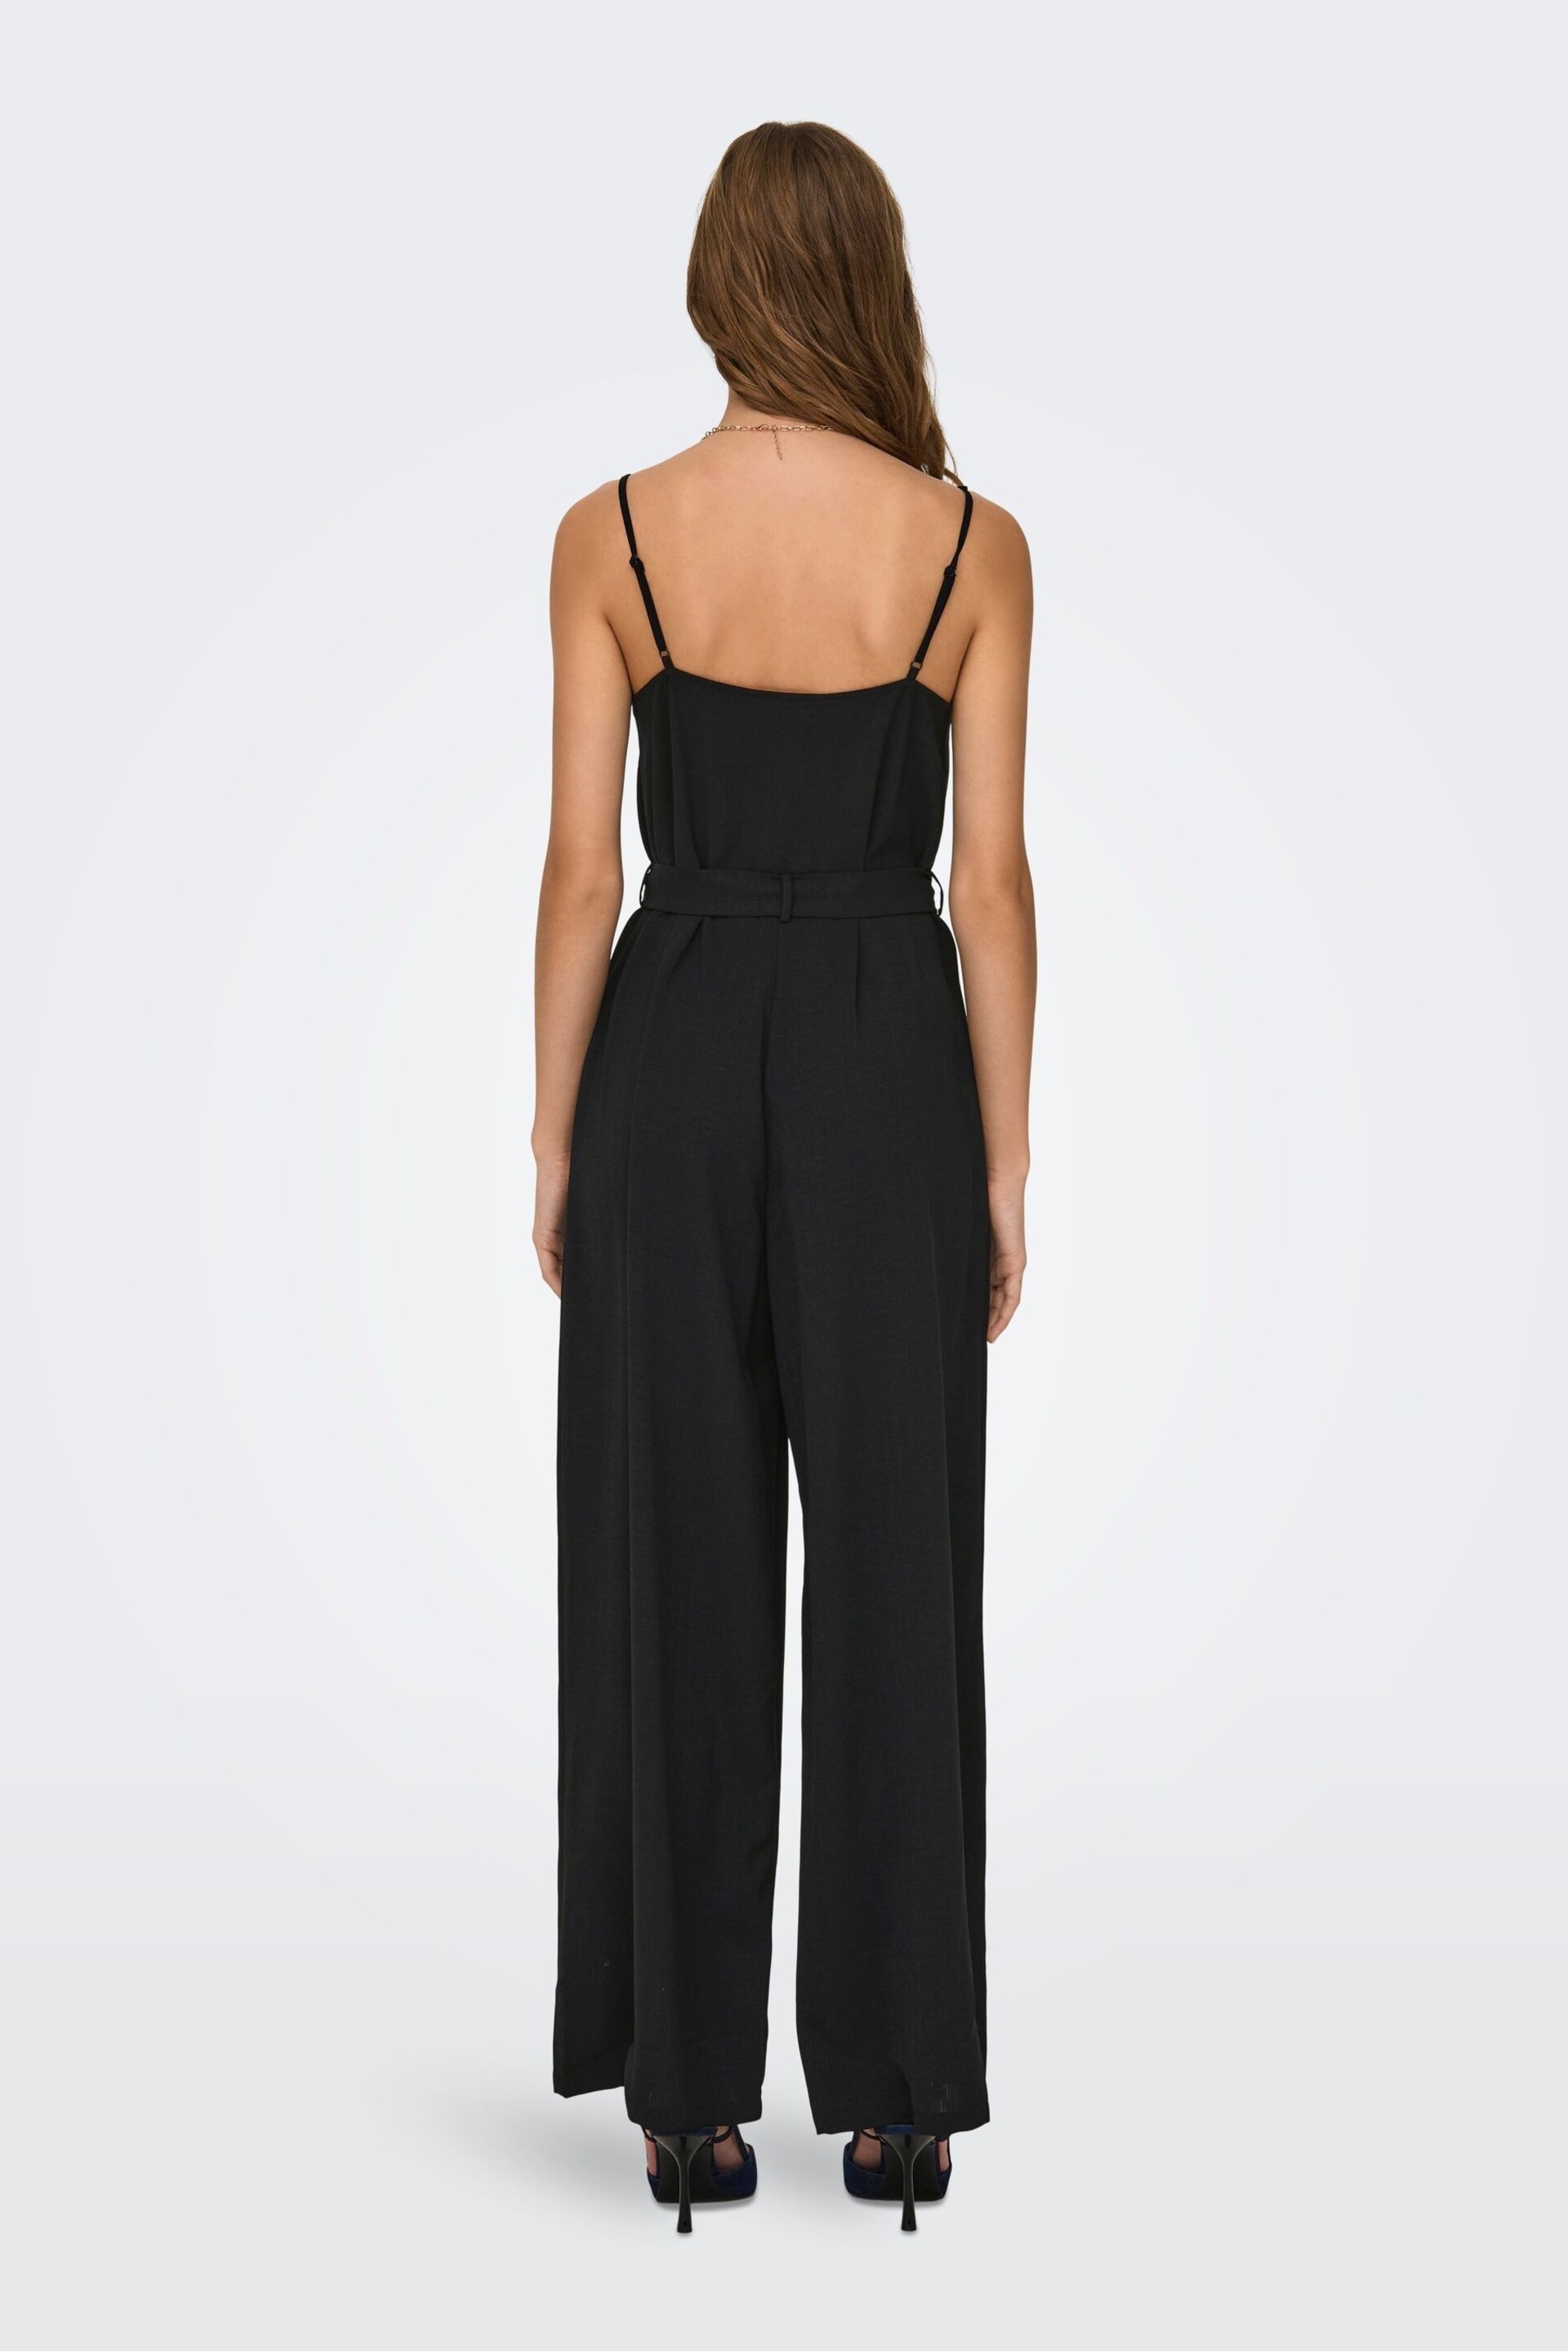 ONLY Black Ruffle Cami Tie Front Jumpsuit - Image 2 of 6